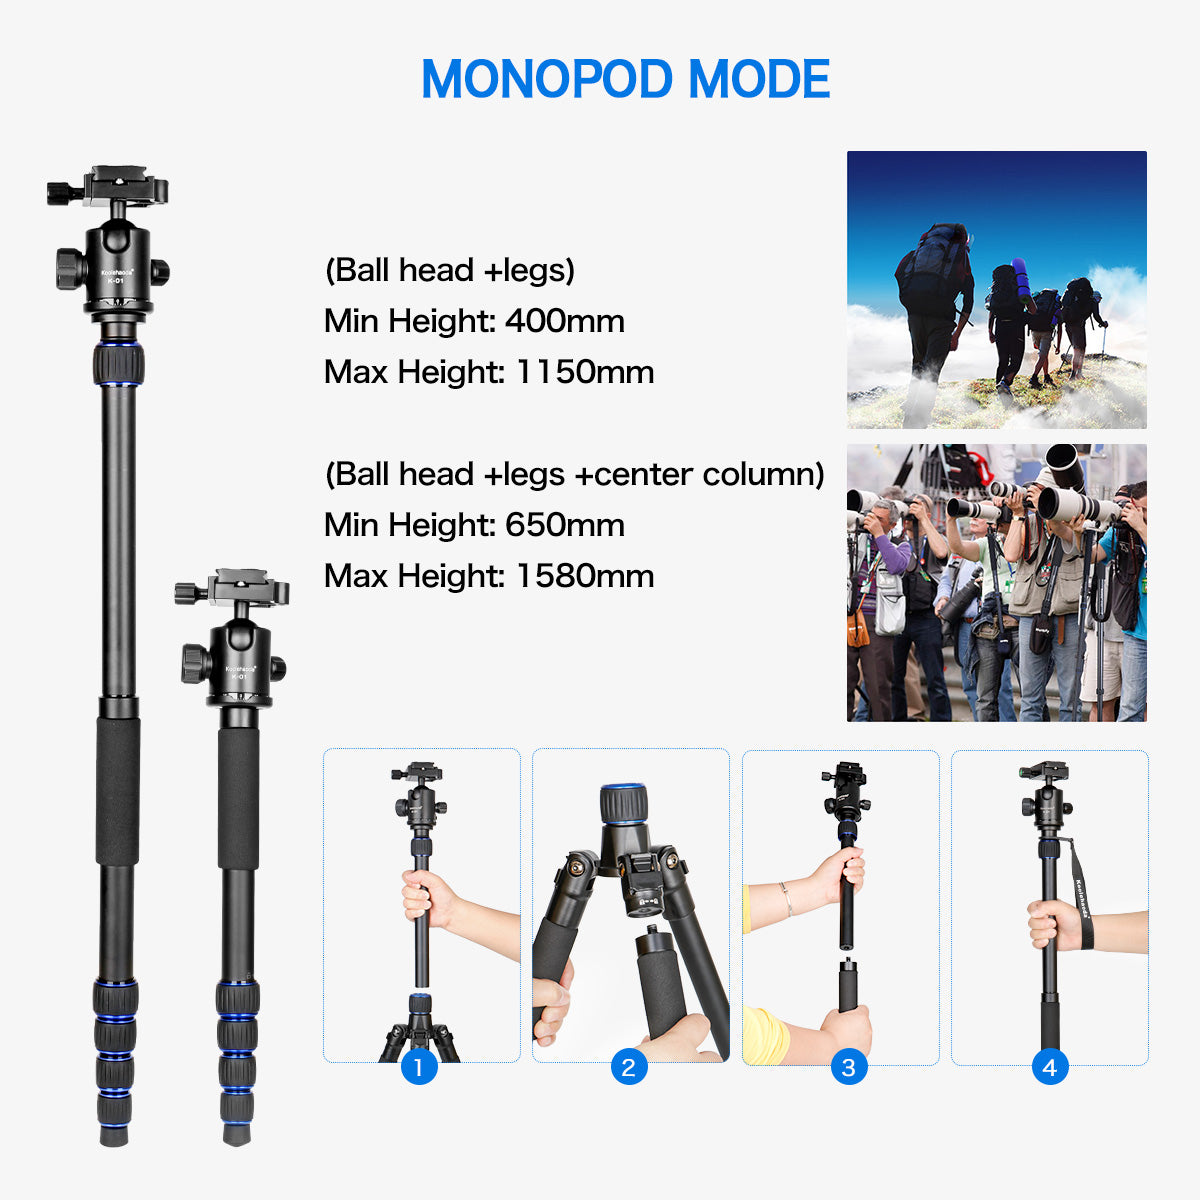 Camera Tripod 62"/156cm Height 33lbs Payload Max Tripod 2 in 1 Portable Camera Tripod Stand with 360 Degree Ball Head for DSLR and Digital Camera